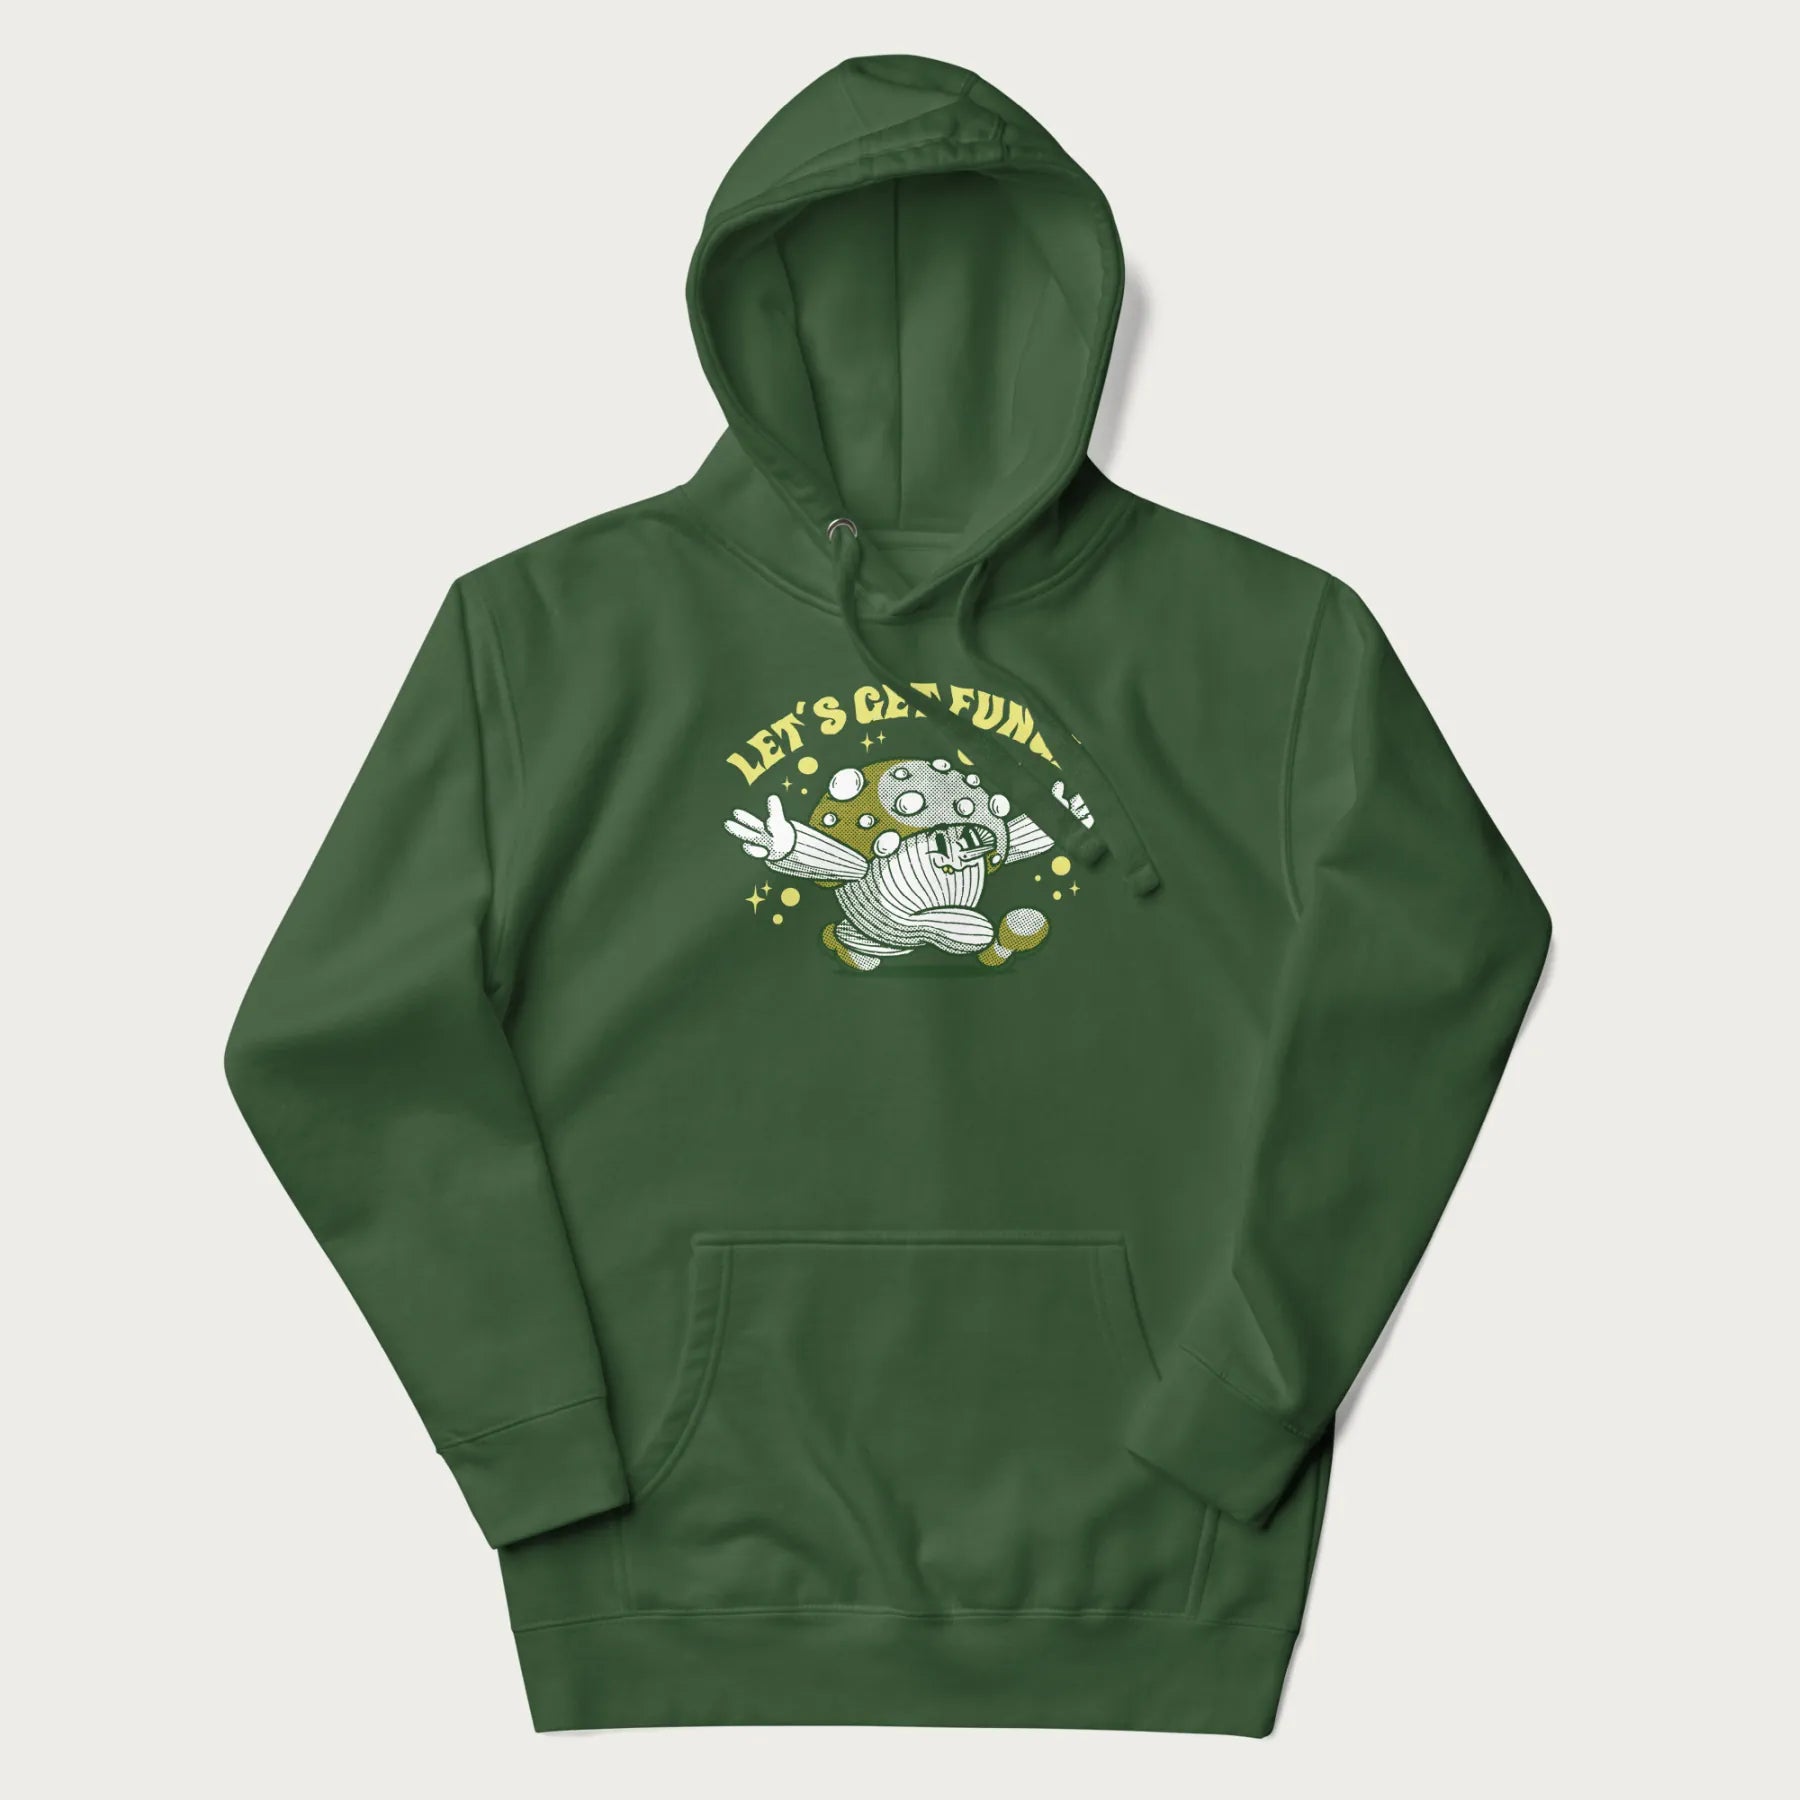 Forest green hoodie with a retro-inspired graphic of a mushroom mascot character and the text 'Let's Get Fungi'.